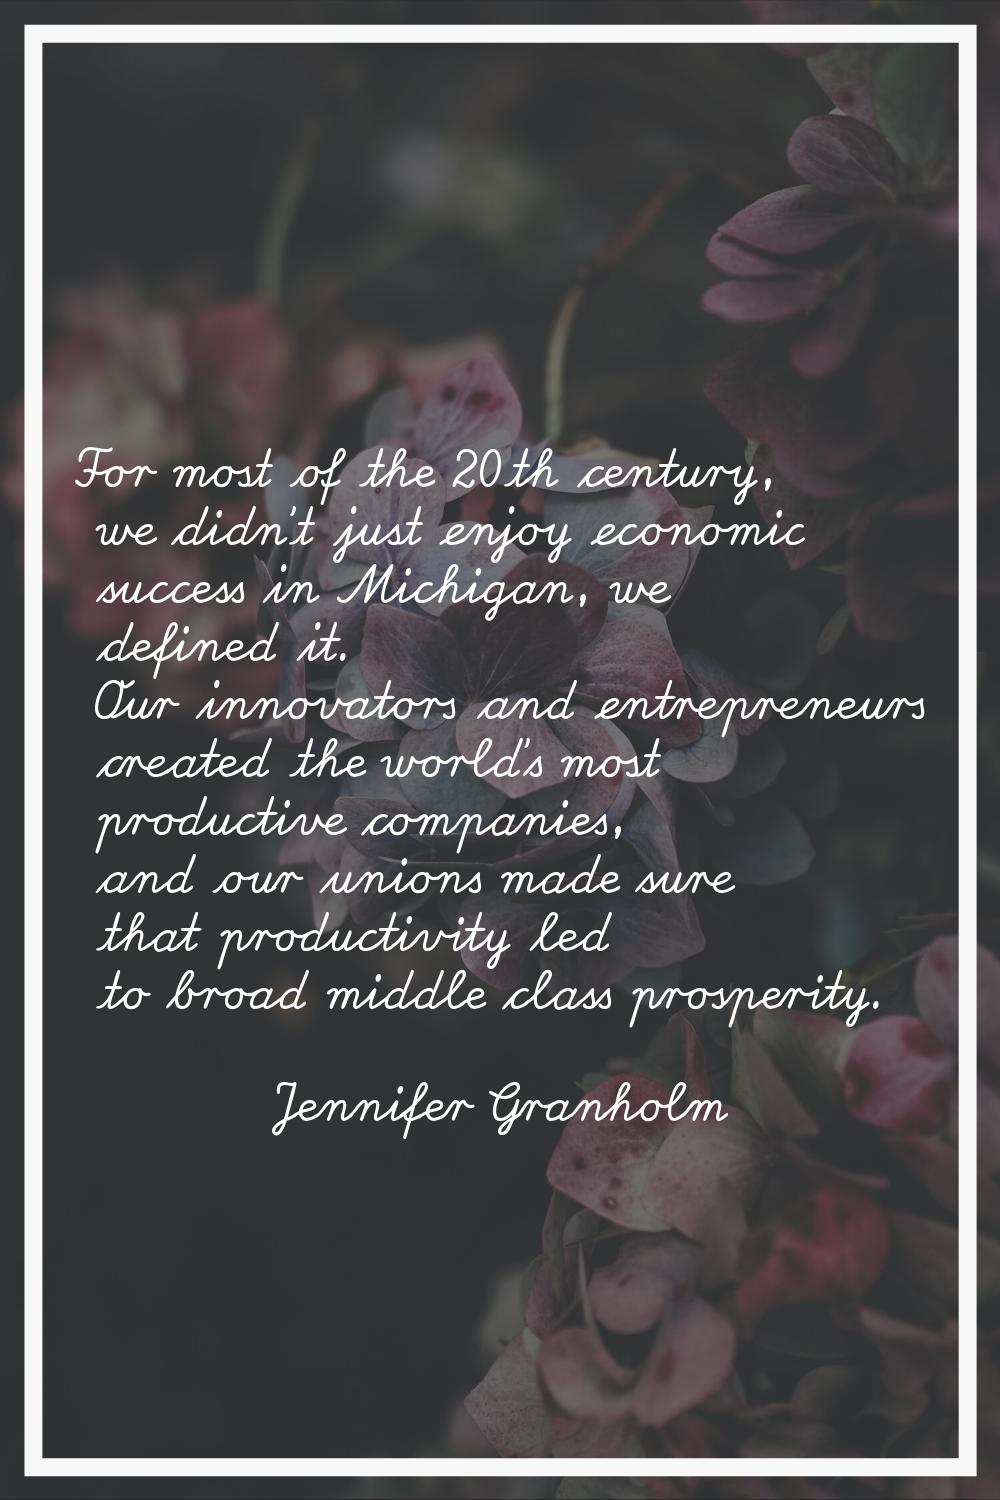 For most of the 20th century, we didn't just enjoy economic success in Michigan, we defined it. Our